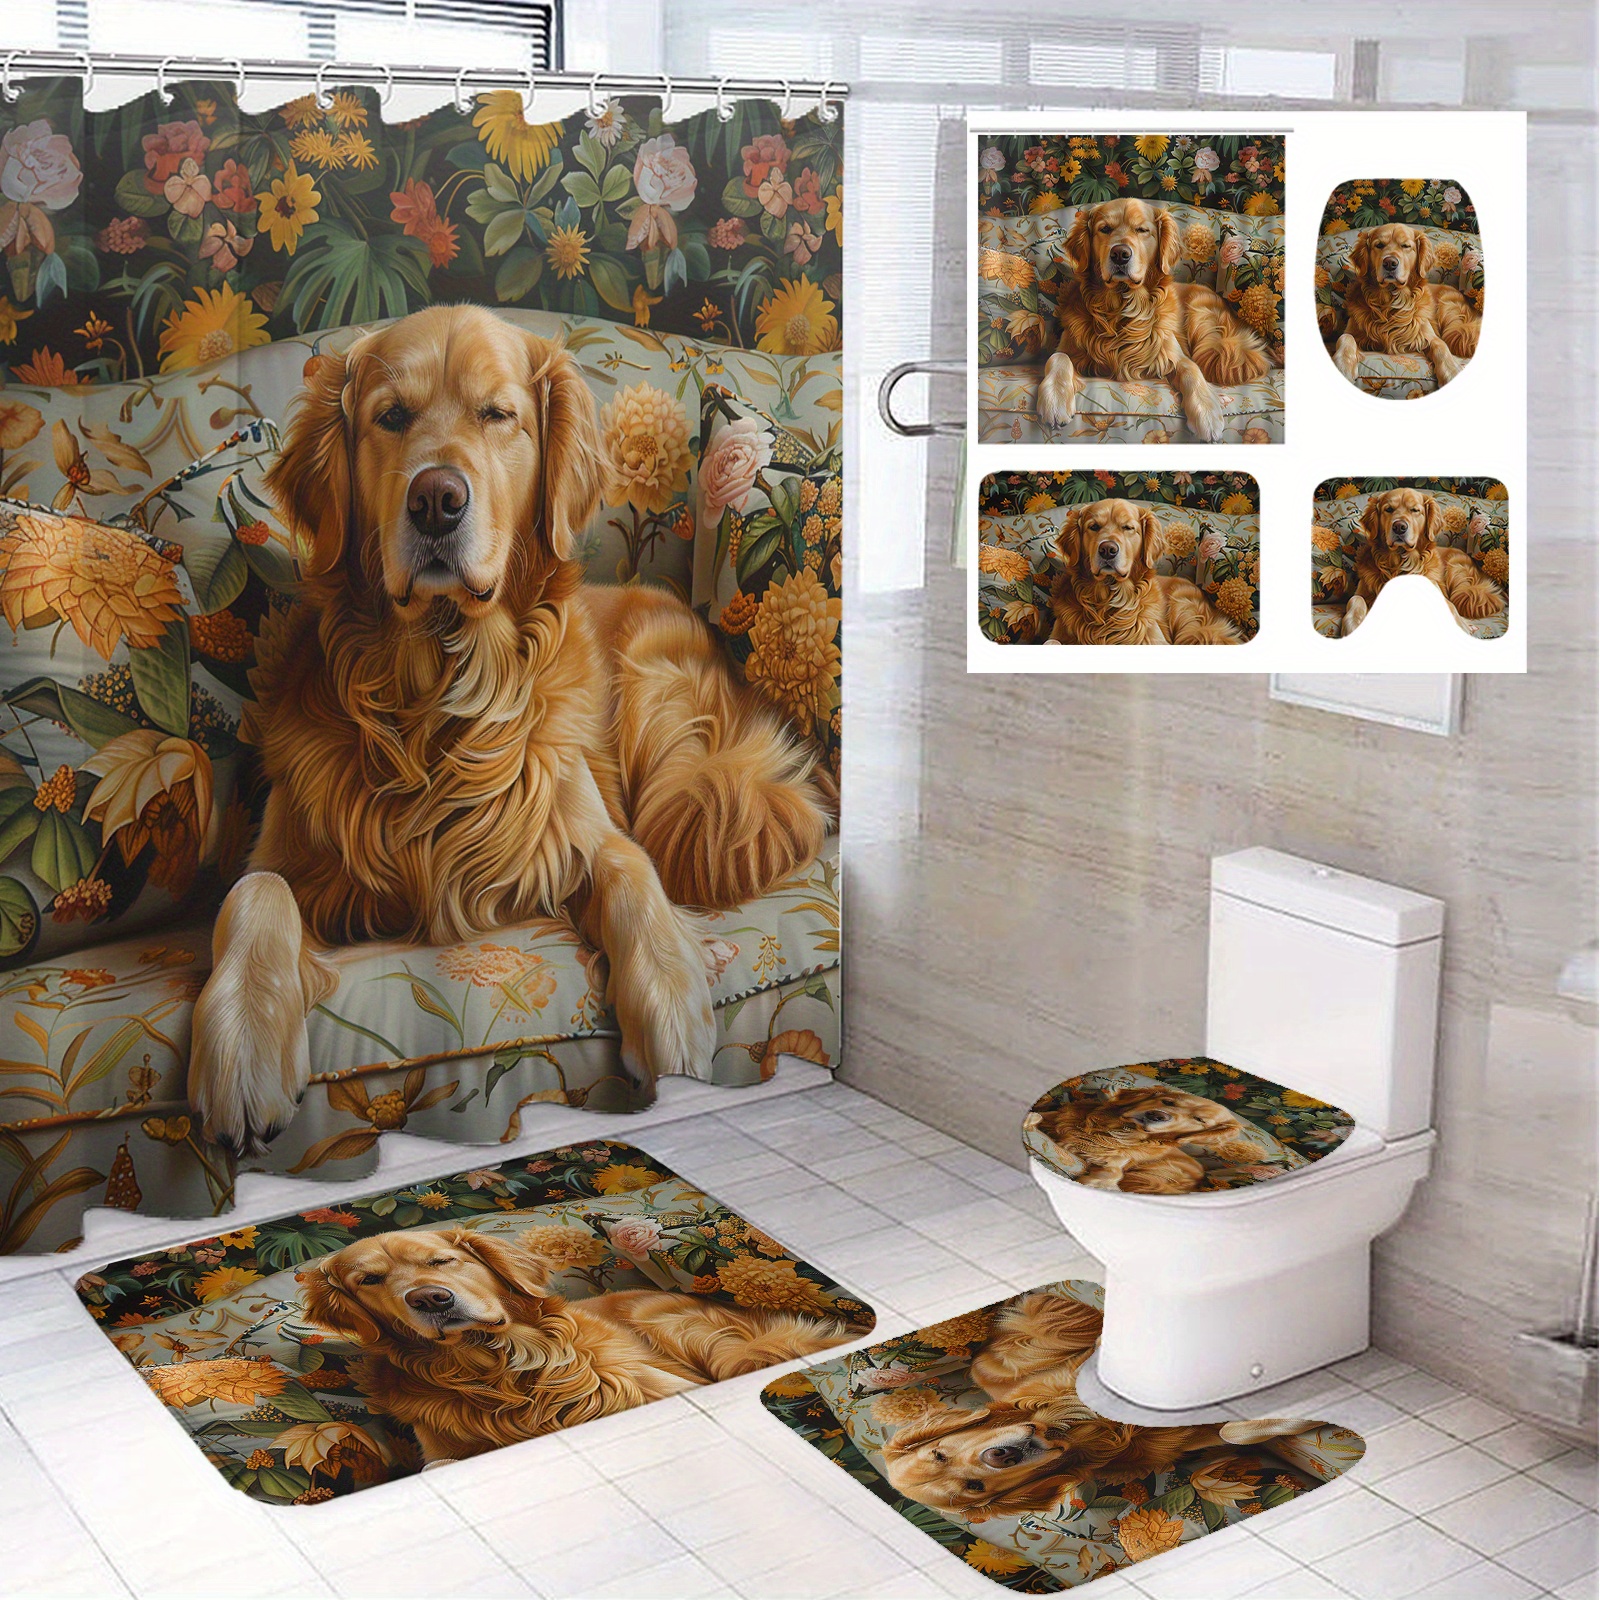 

Golden Retriever Printed Modern Bathroom Set: Includes 71"x71" Shower Curtain, 45"x17.7" Rug, 38"x15" Toilet Seat Cover, And 37"x14.6" U-shaped Mat - Perfect For Dog Lovers